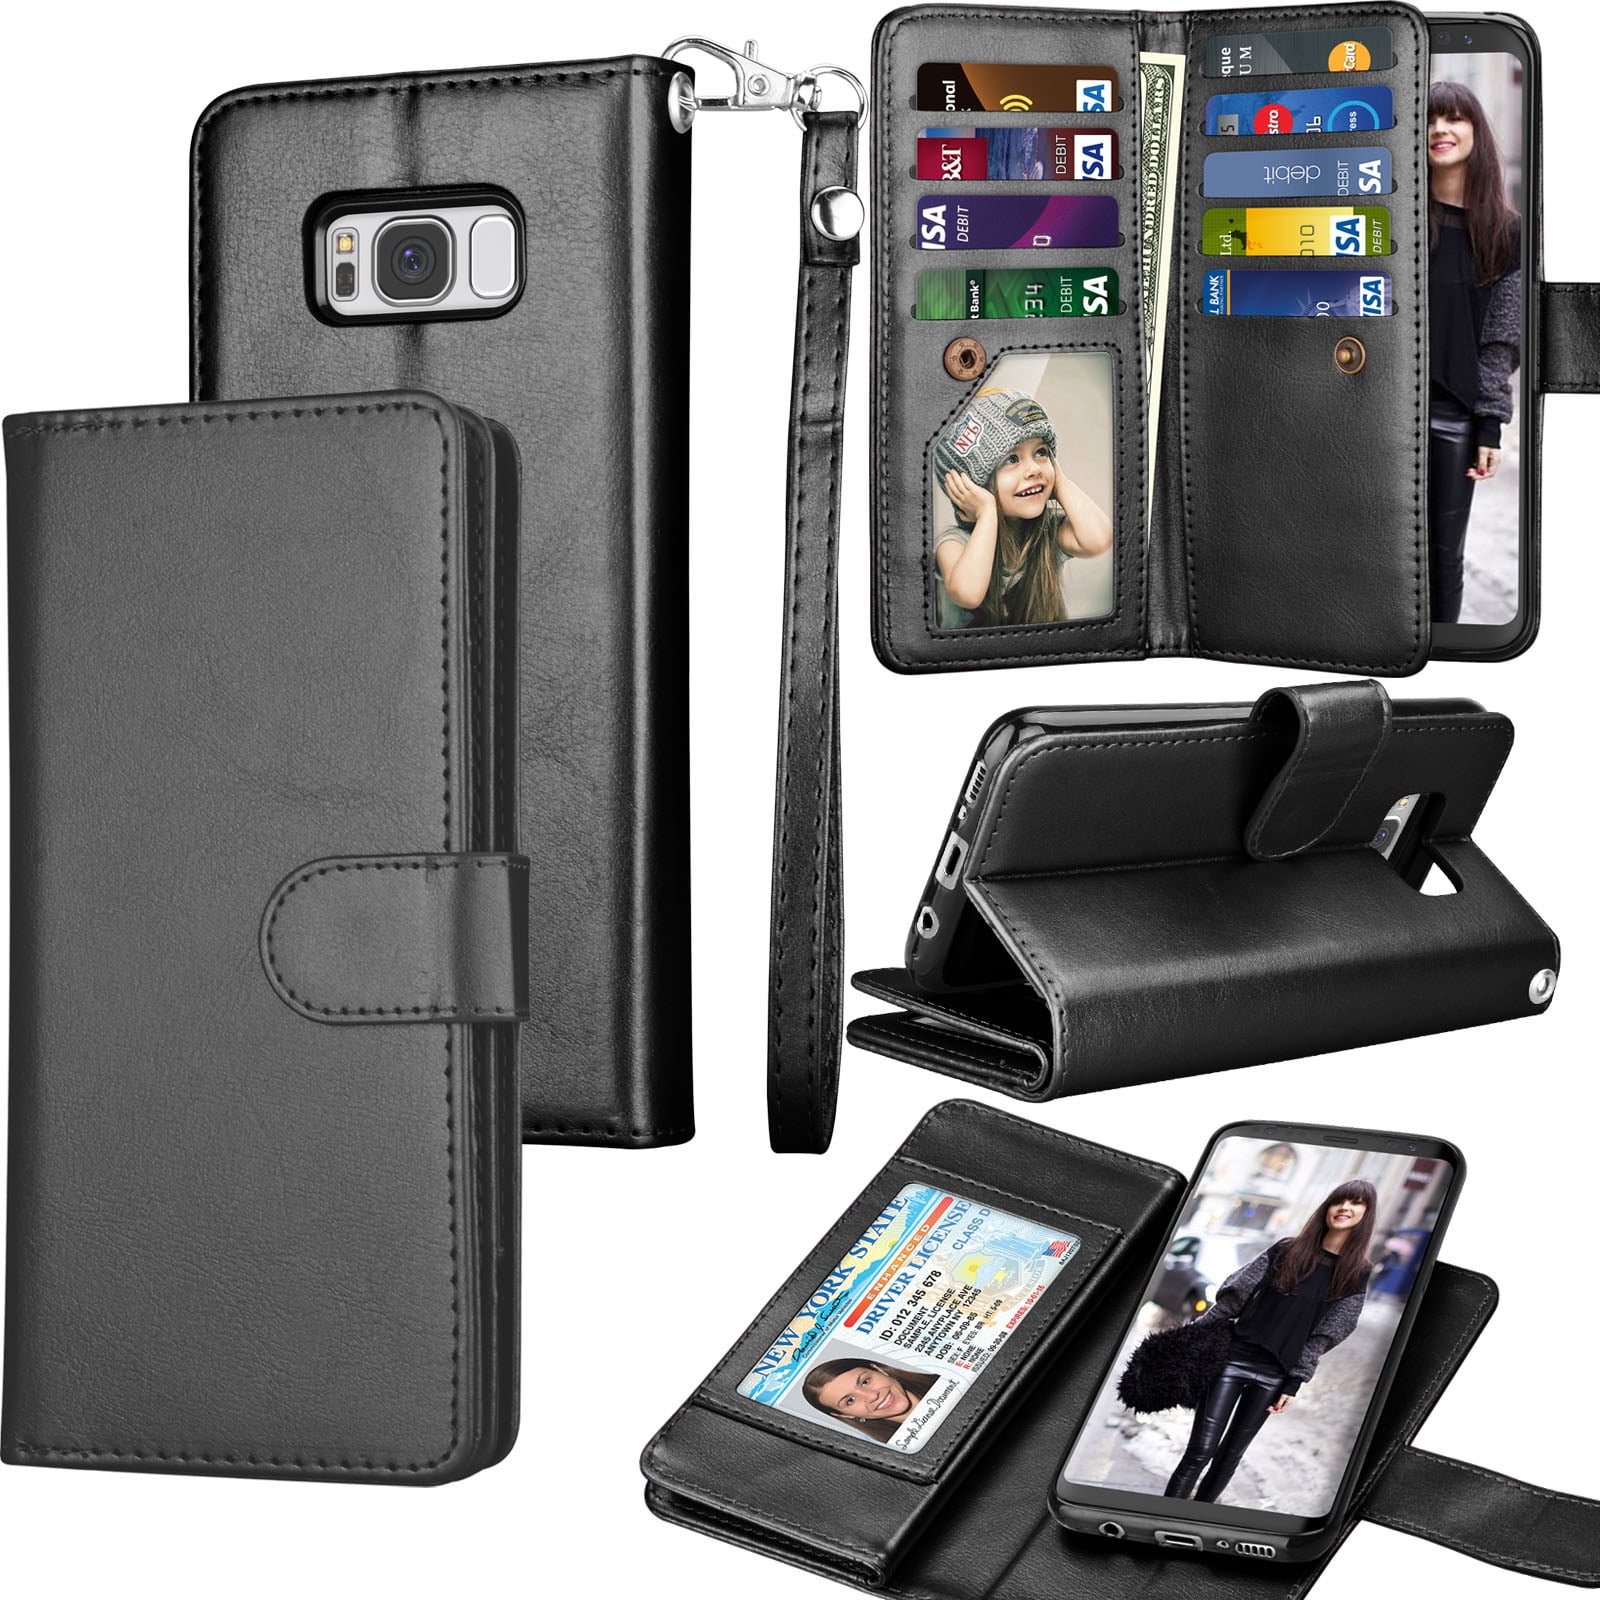 Samsung Galaxy S8 Flip Case Cover for Leather Kickstand Extra-Durable Business wallet case Card Holders Flip Cover